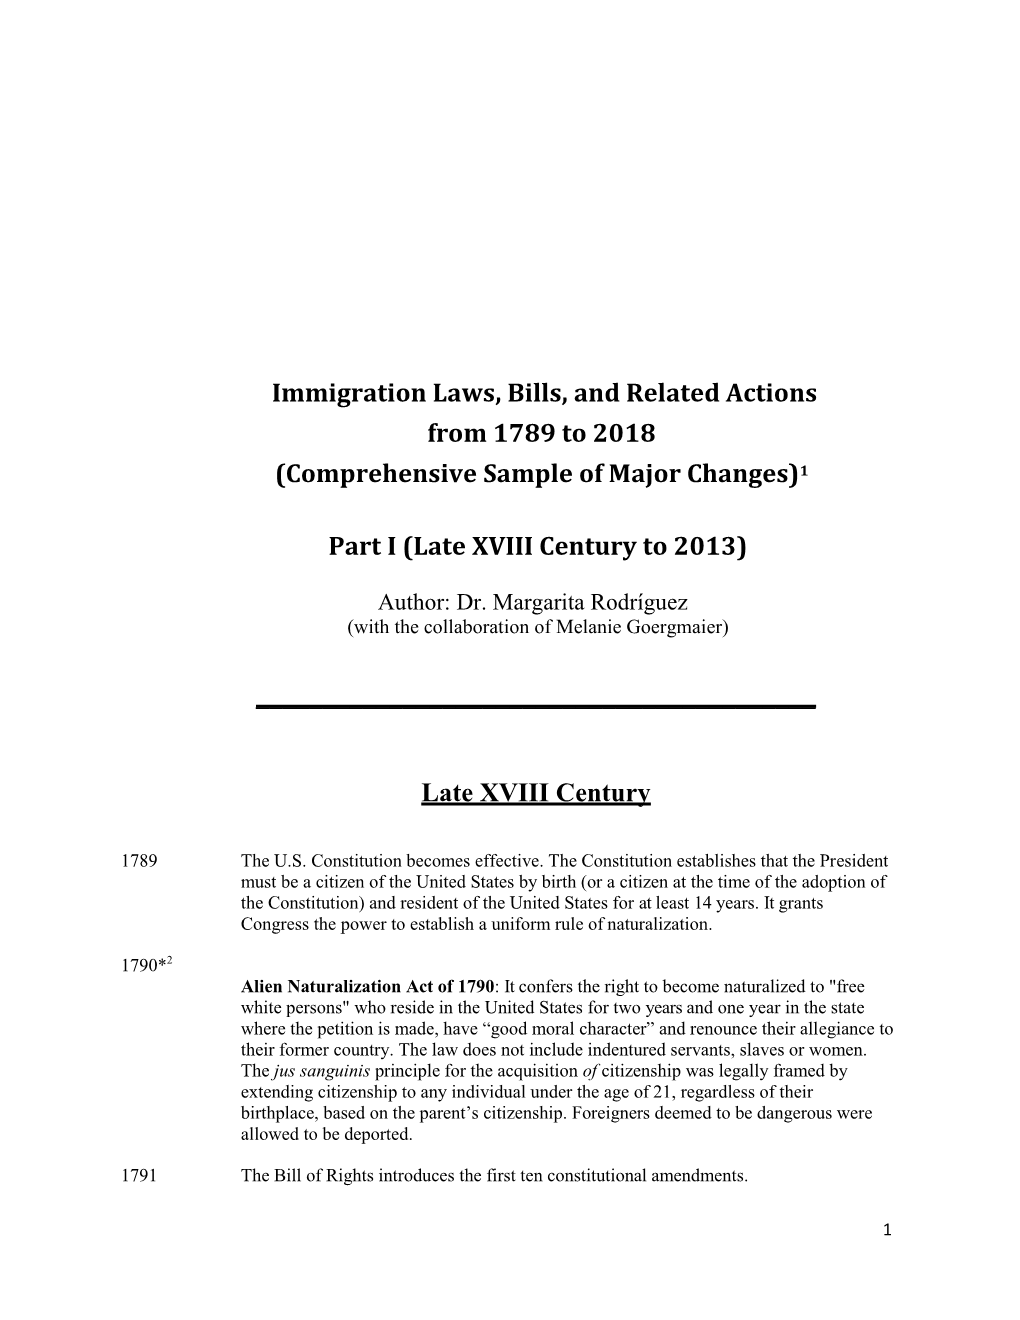 Immigration Laws, Bills, and Related Actions from 1789 to 2018 (Comprehensive Sample of Major Changes)1